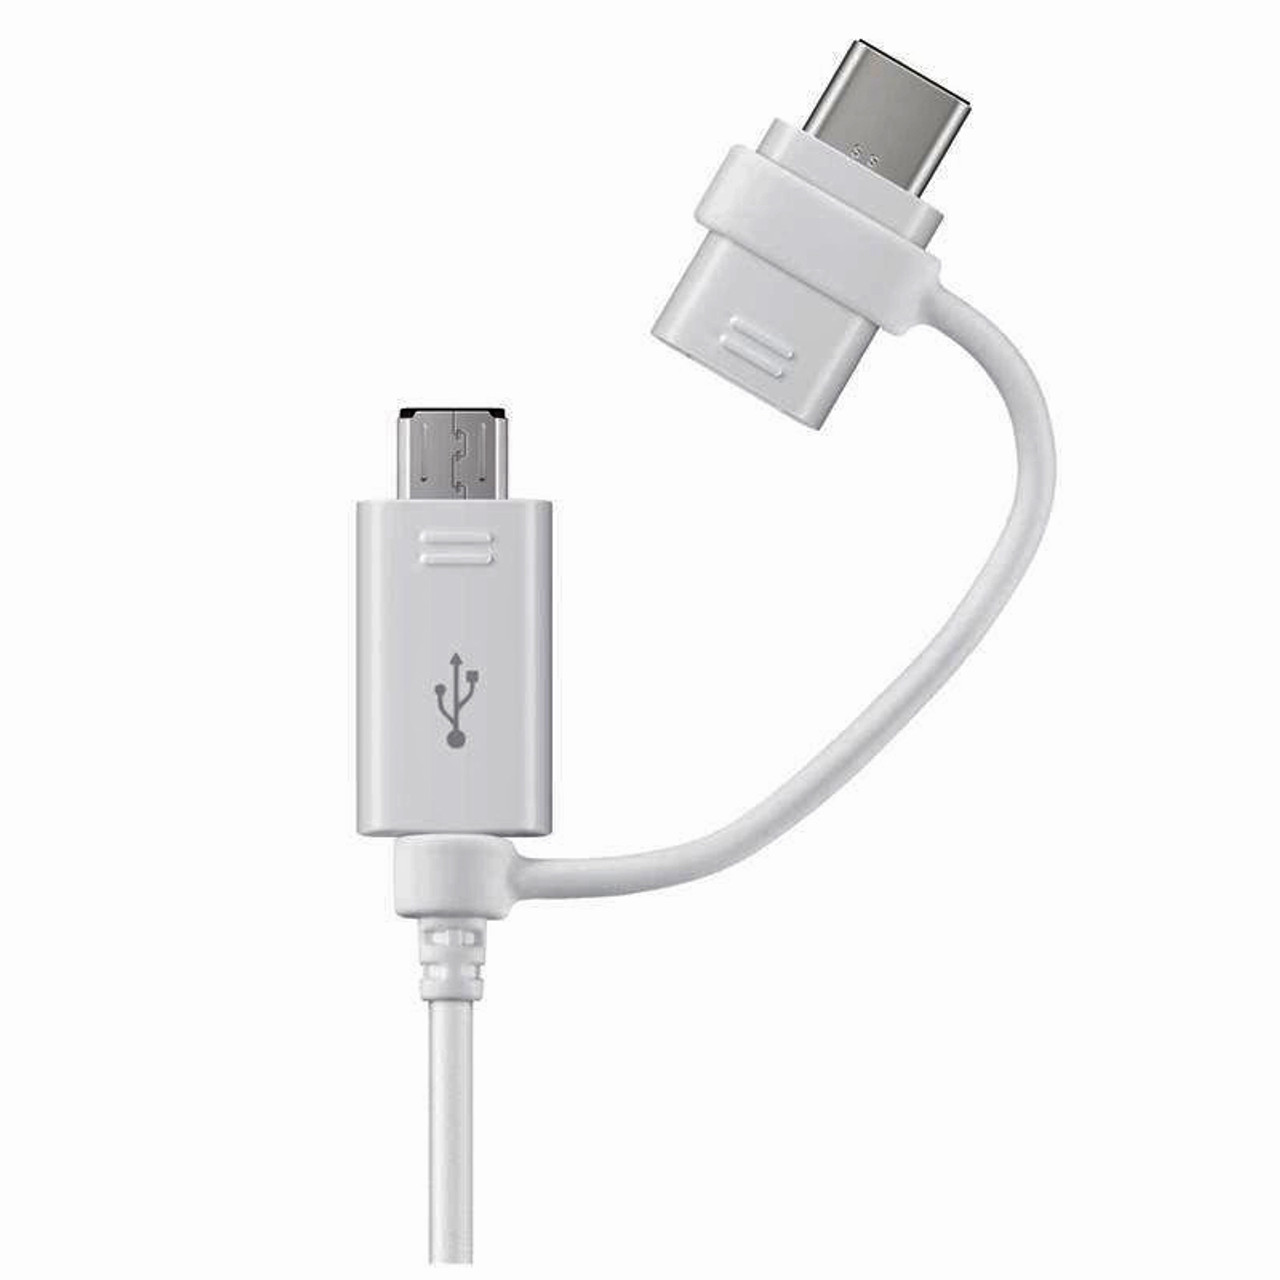 Samsung USB Type-C (USB-C) And Micro USB 2-in-1 Adapter Cable Data Sync Power Supply Charger Cord 2A Fast Charging White Black 1.5M